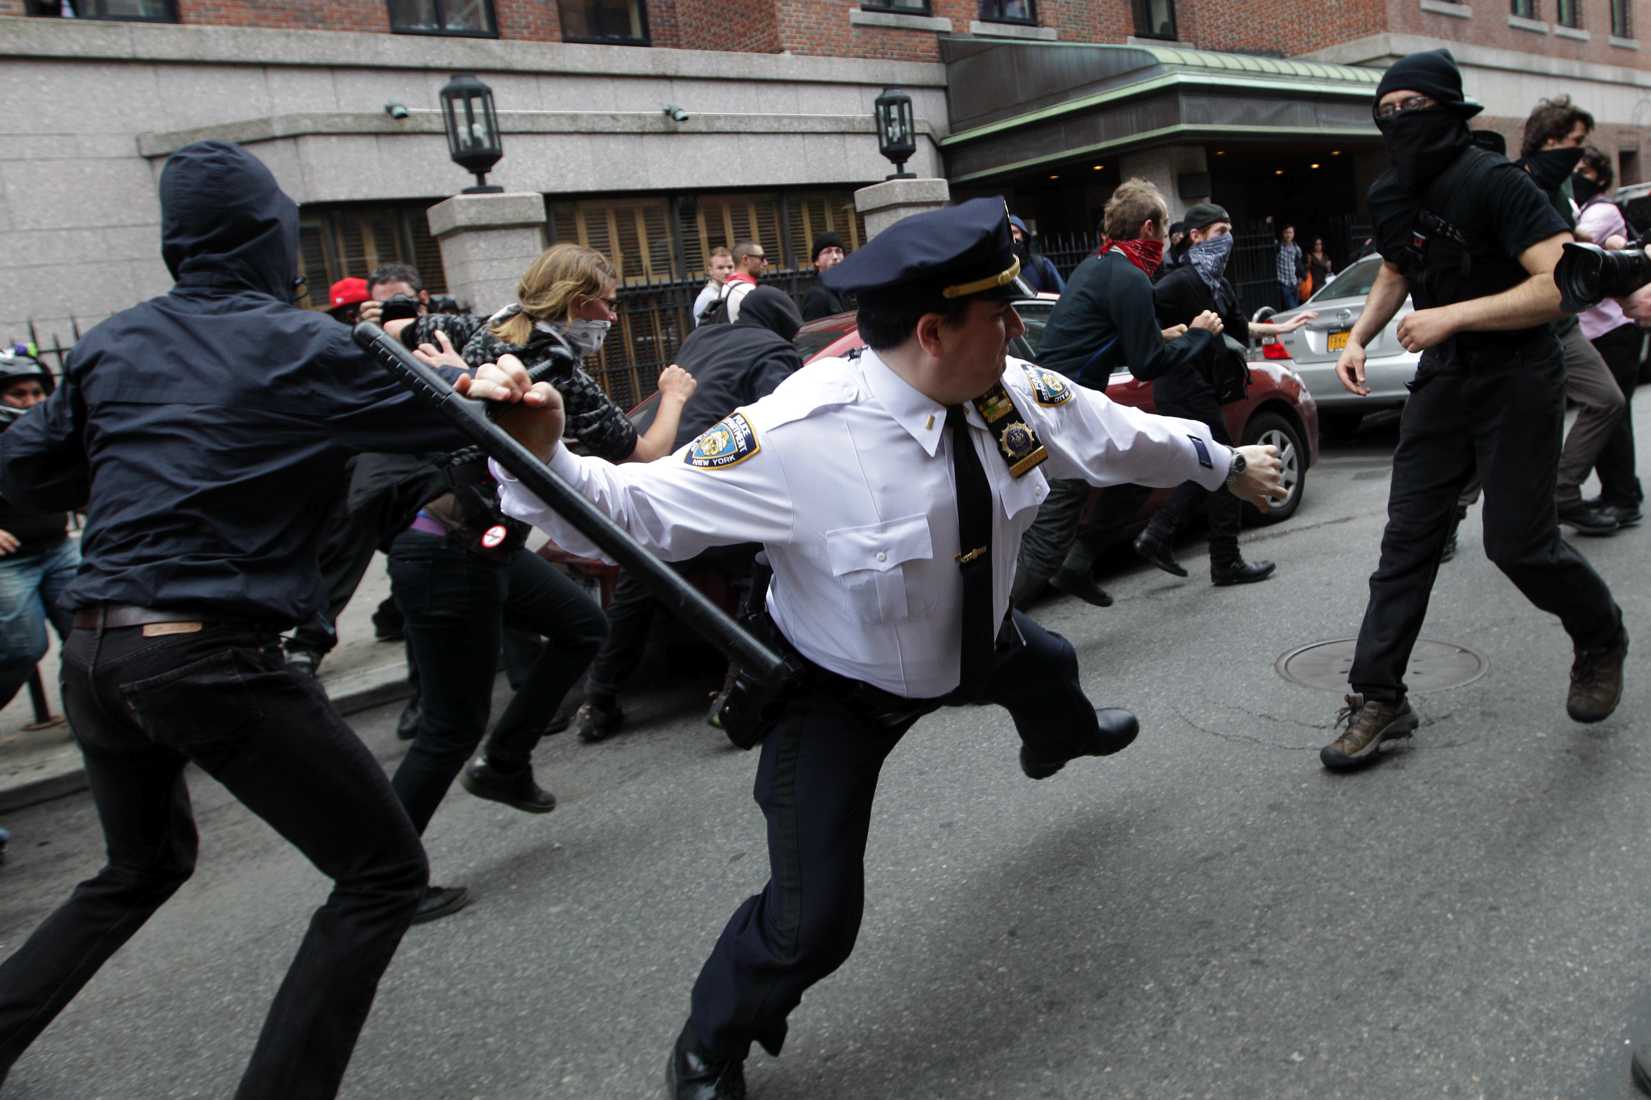 A police lieutenant swings his baton at Occupy Wall Street activists in New York City on May 1, 2012. (Mary Altaffer—AP Photo)